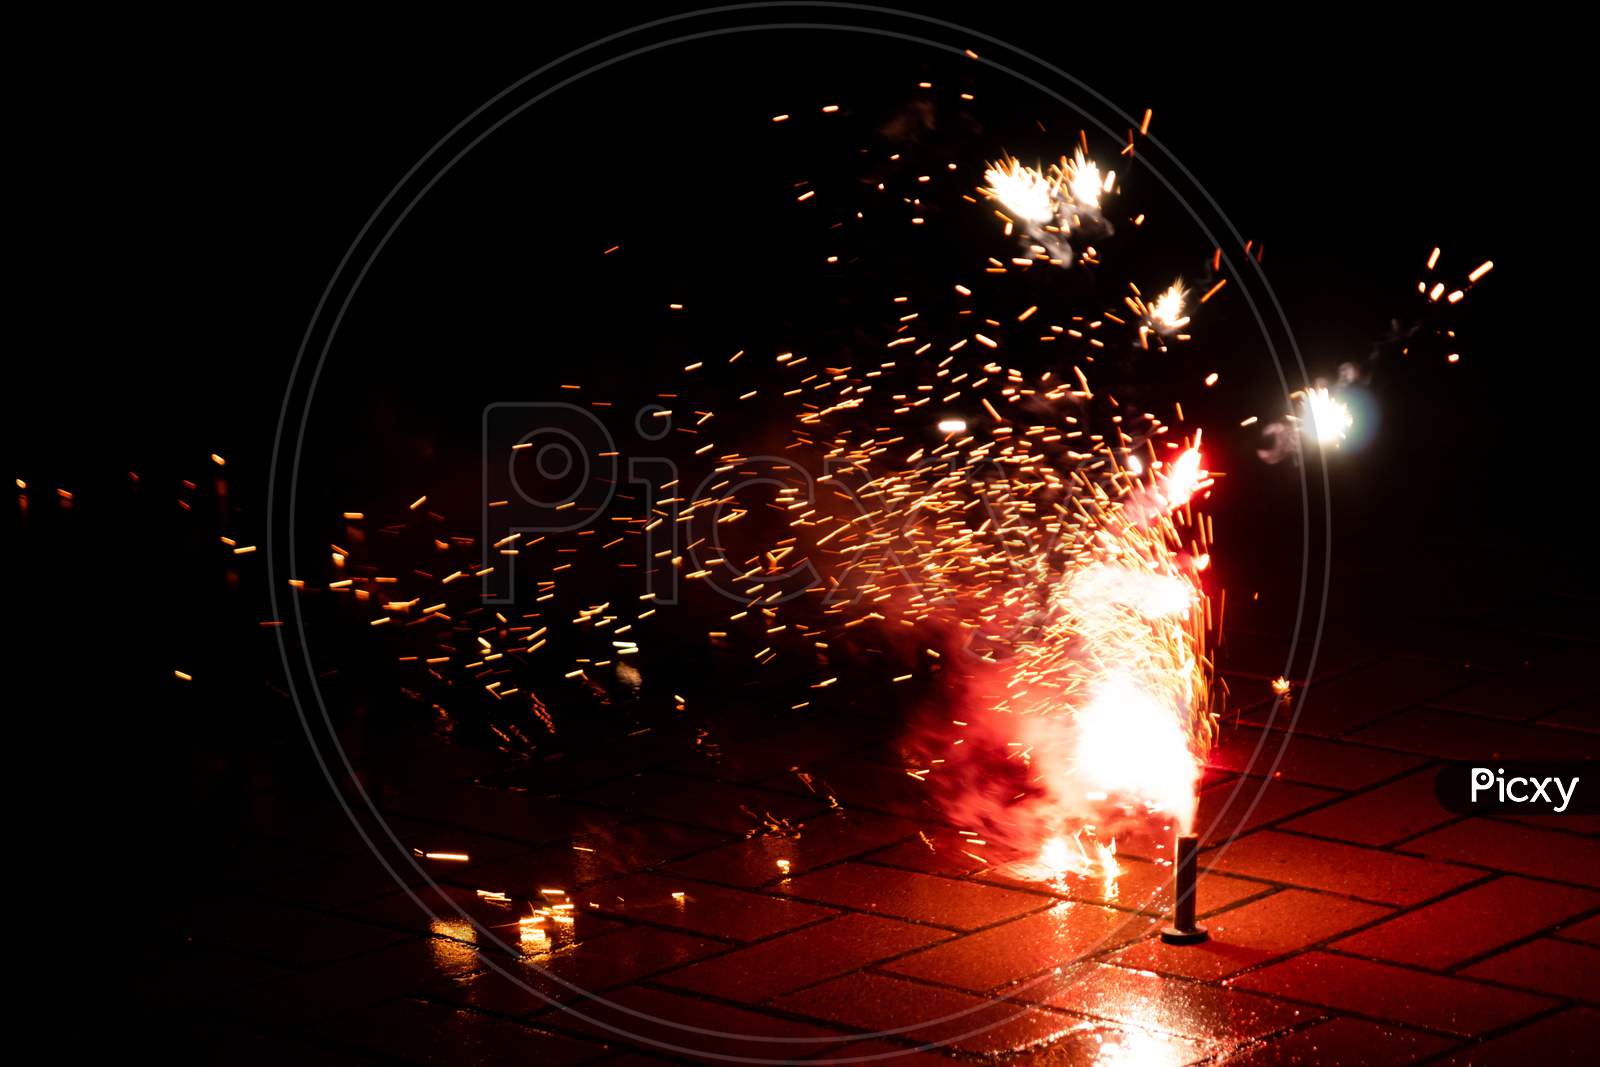 Colorful fireworks illuminates the silvester night with firecrackers, bangers and explosive pyrotechnics and fountains of light to celebrate into a happy new year on a silvester party with friends